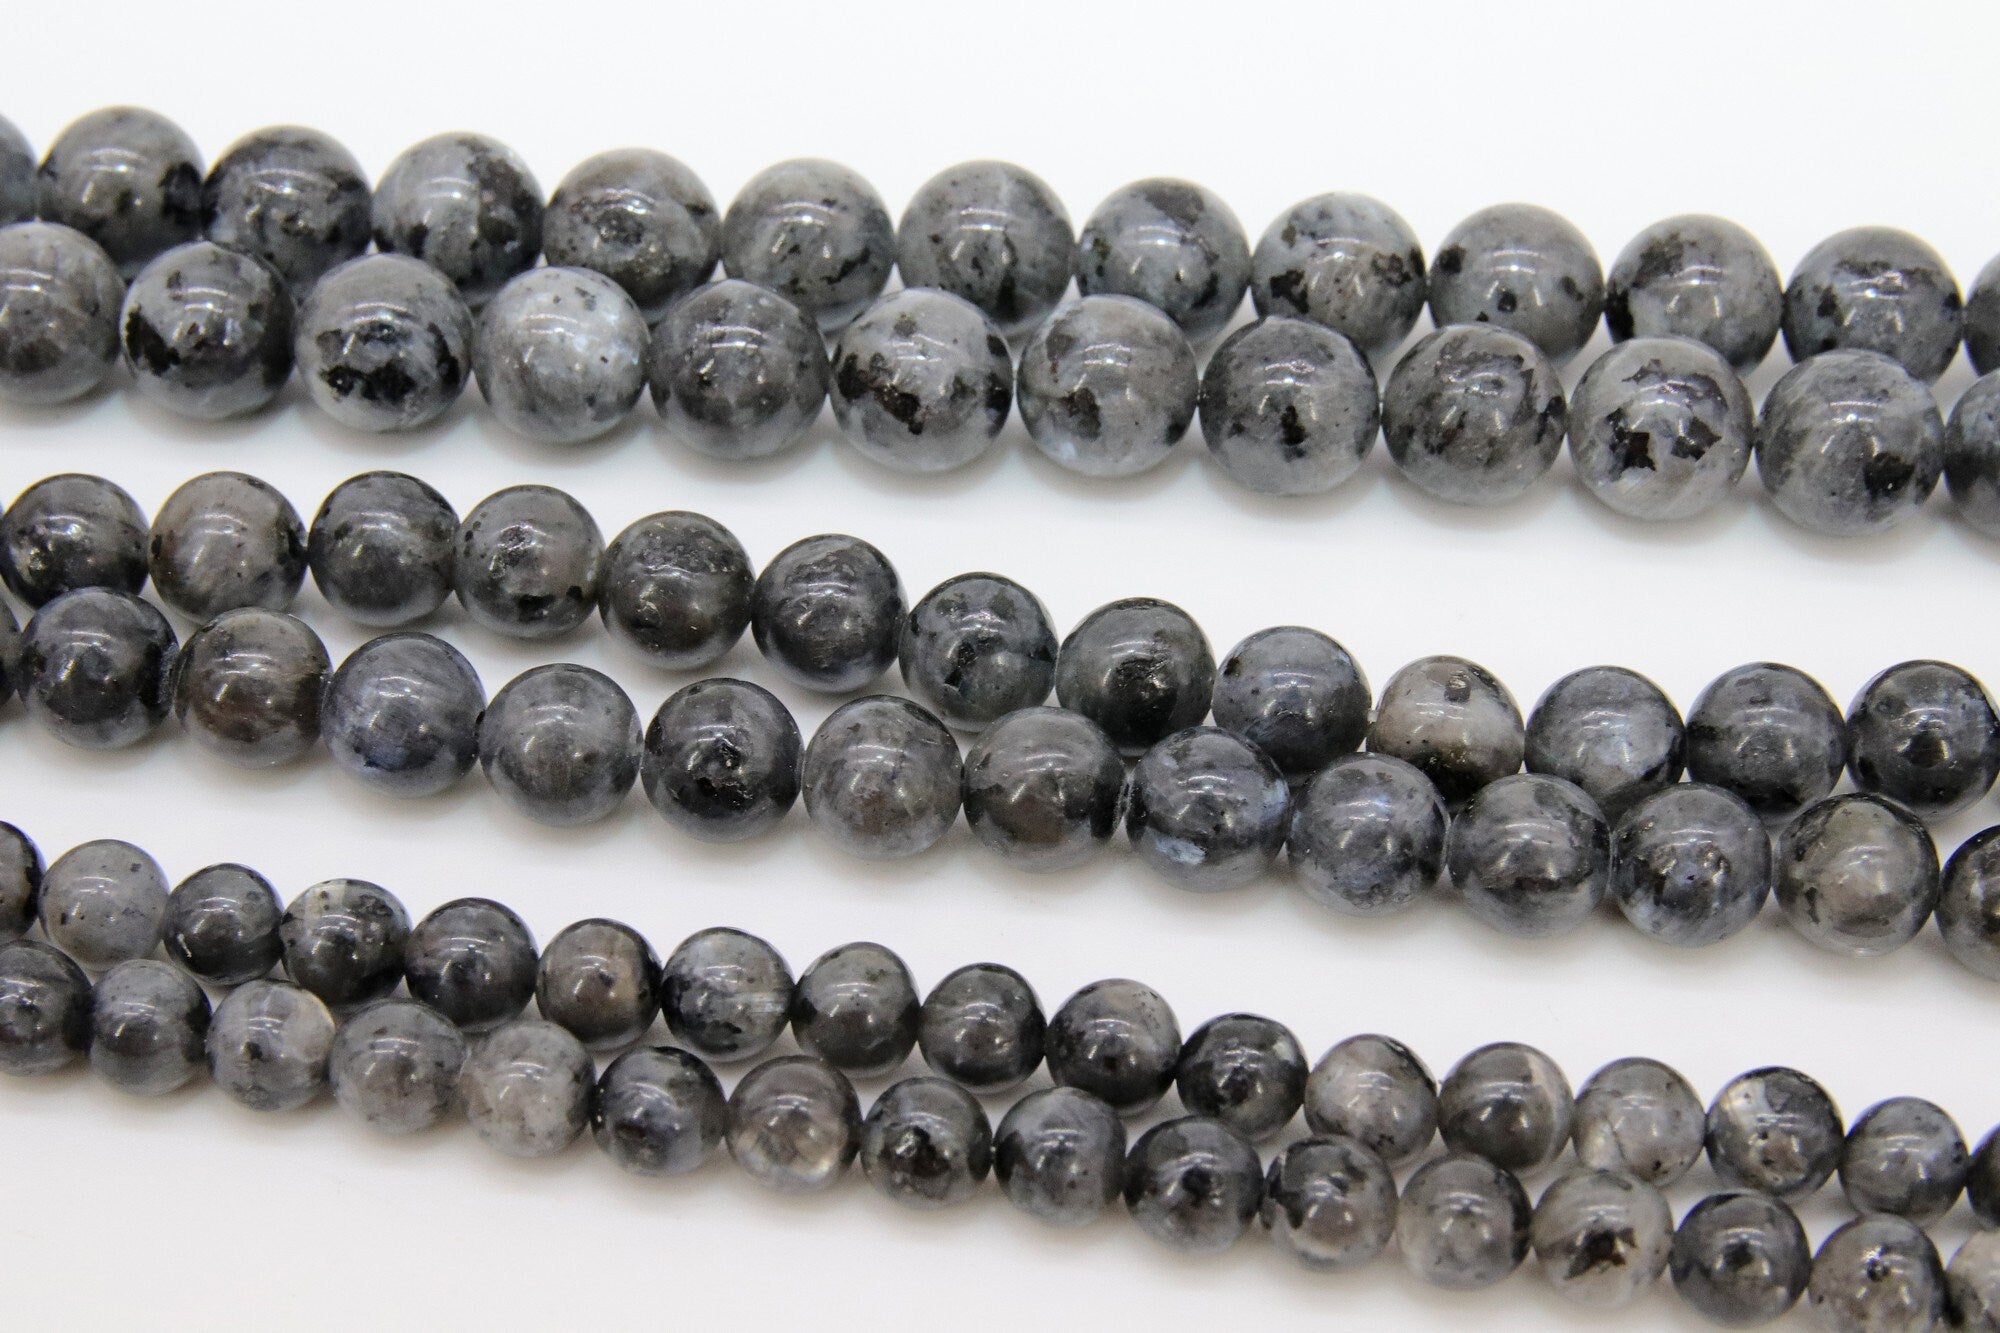 Natural Labradorite Beads, Smooth Shiny Round Black Gray Beads BS #34, size 6mm